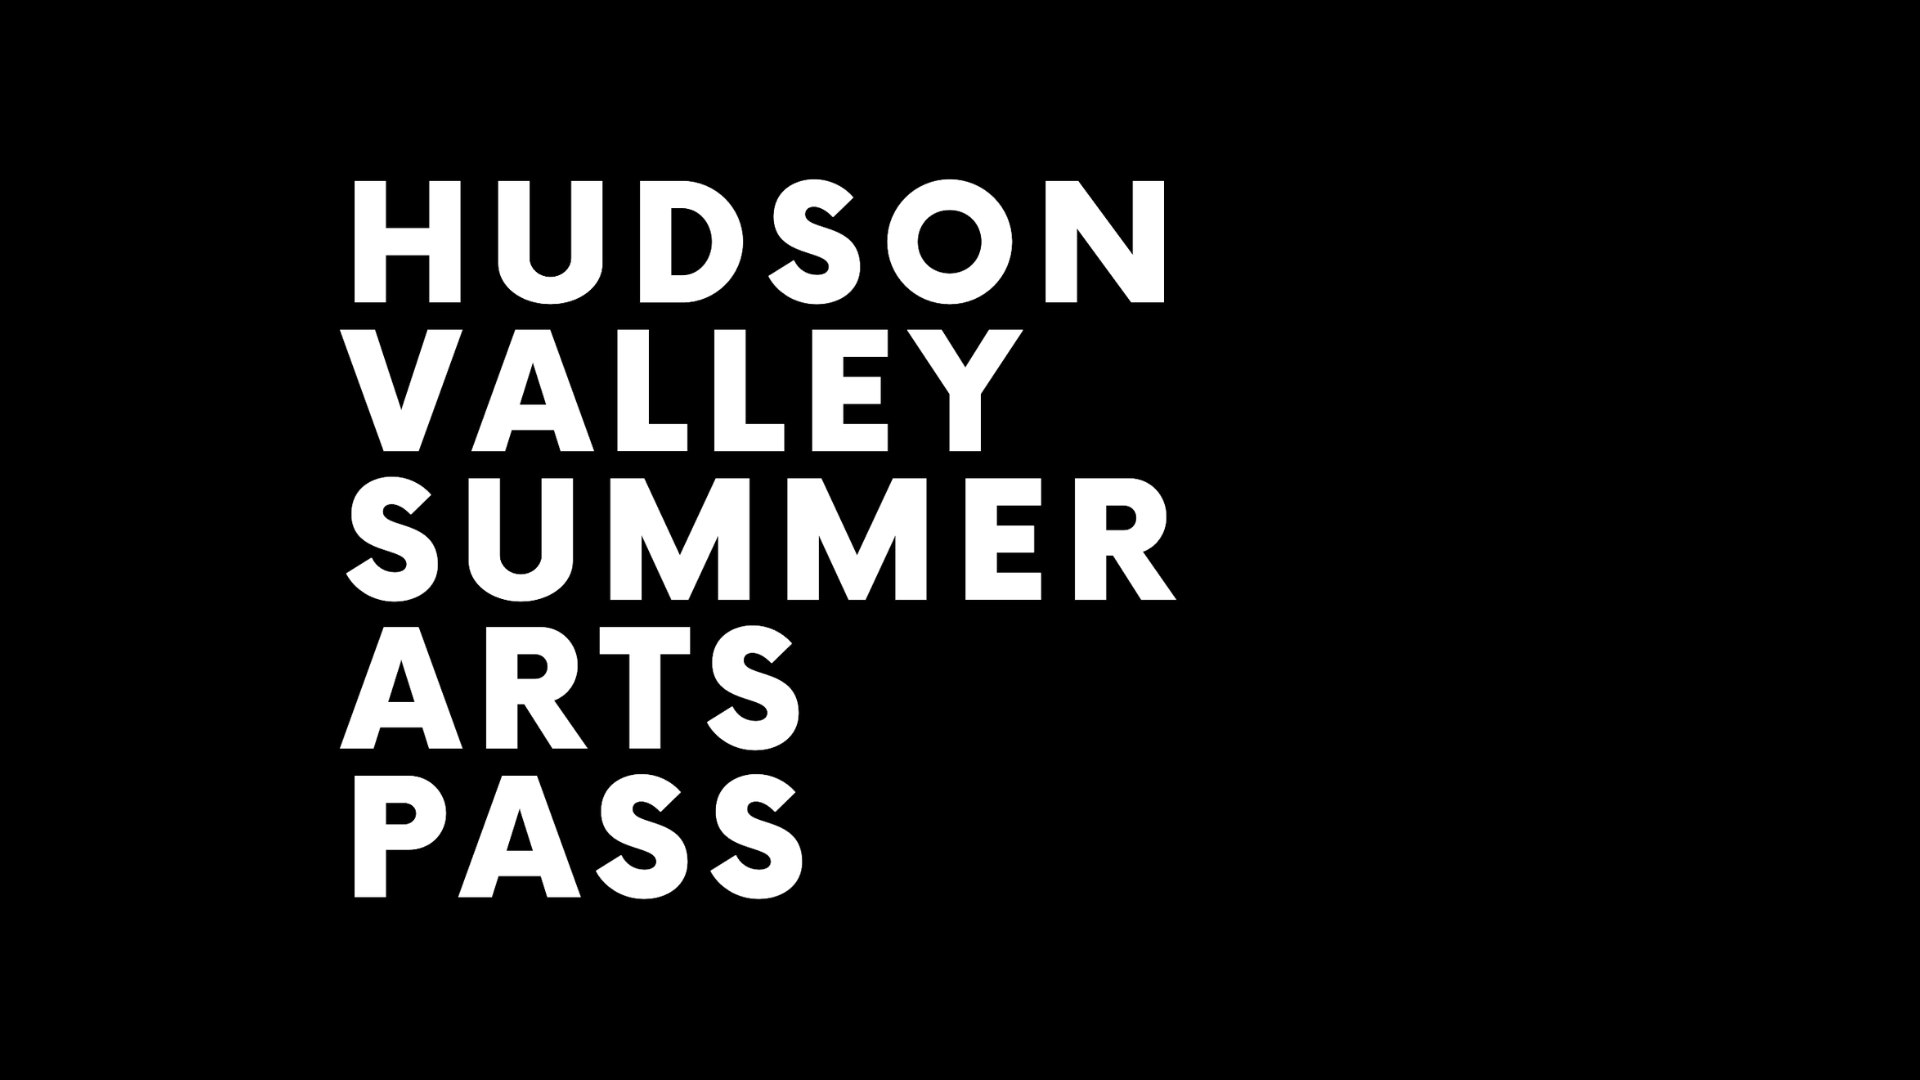 texts says Hudson Valley Summer Arts Pass, white text on black background